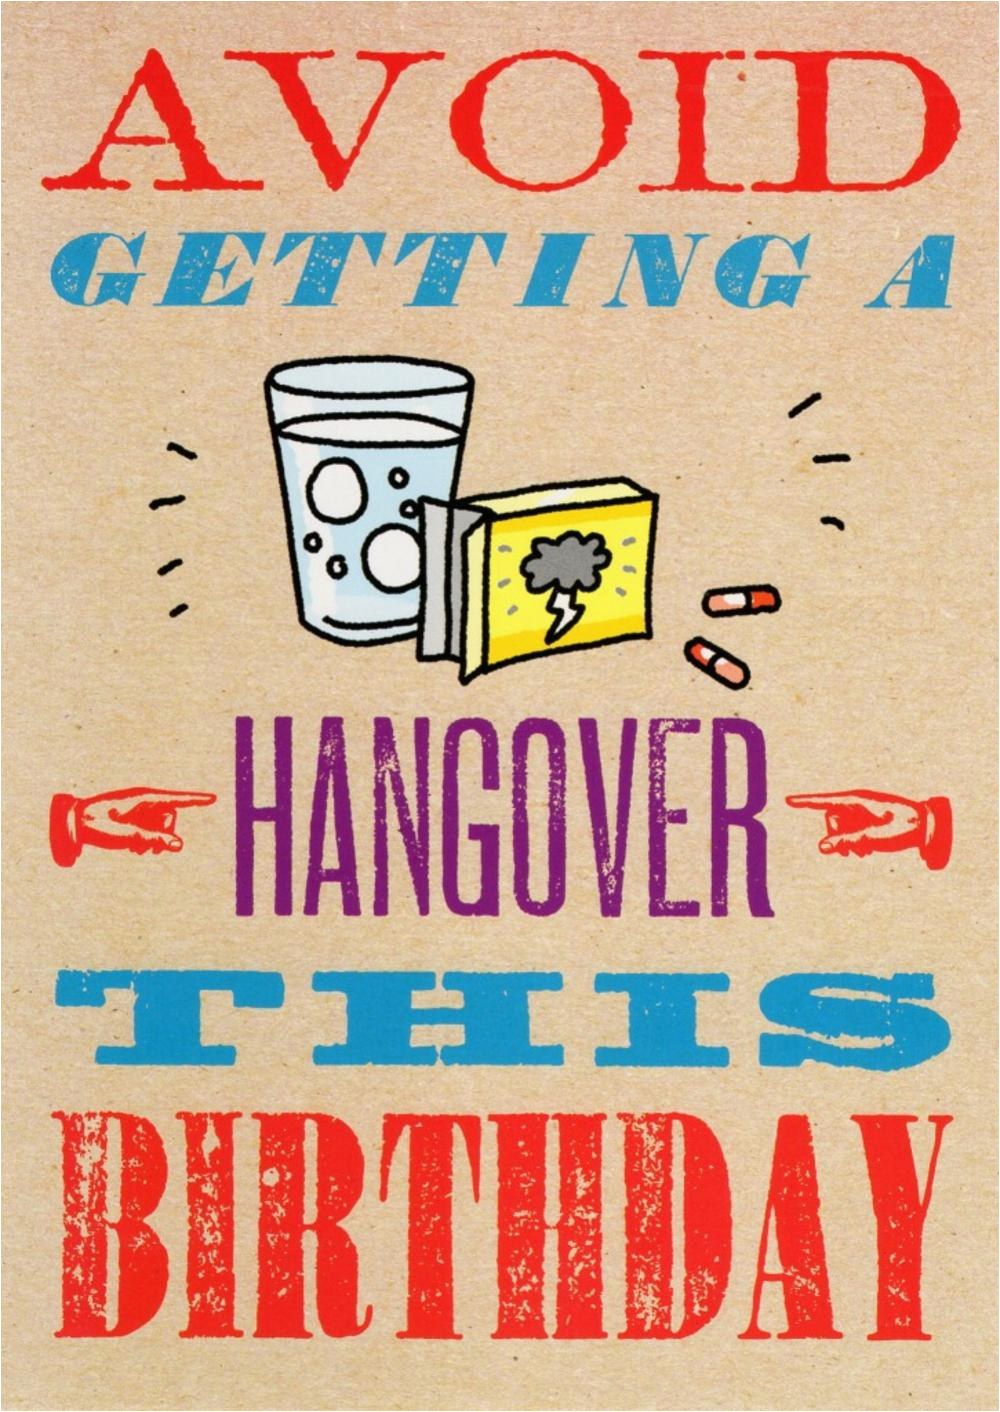 kcsnhpp002 avoid getting a hangover funny birthday card hot potato range greeting cards